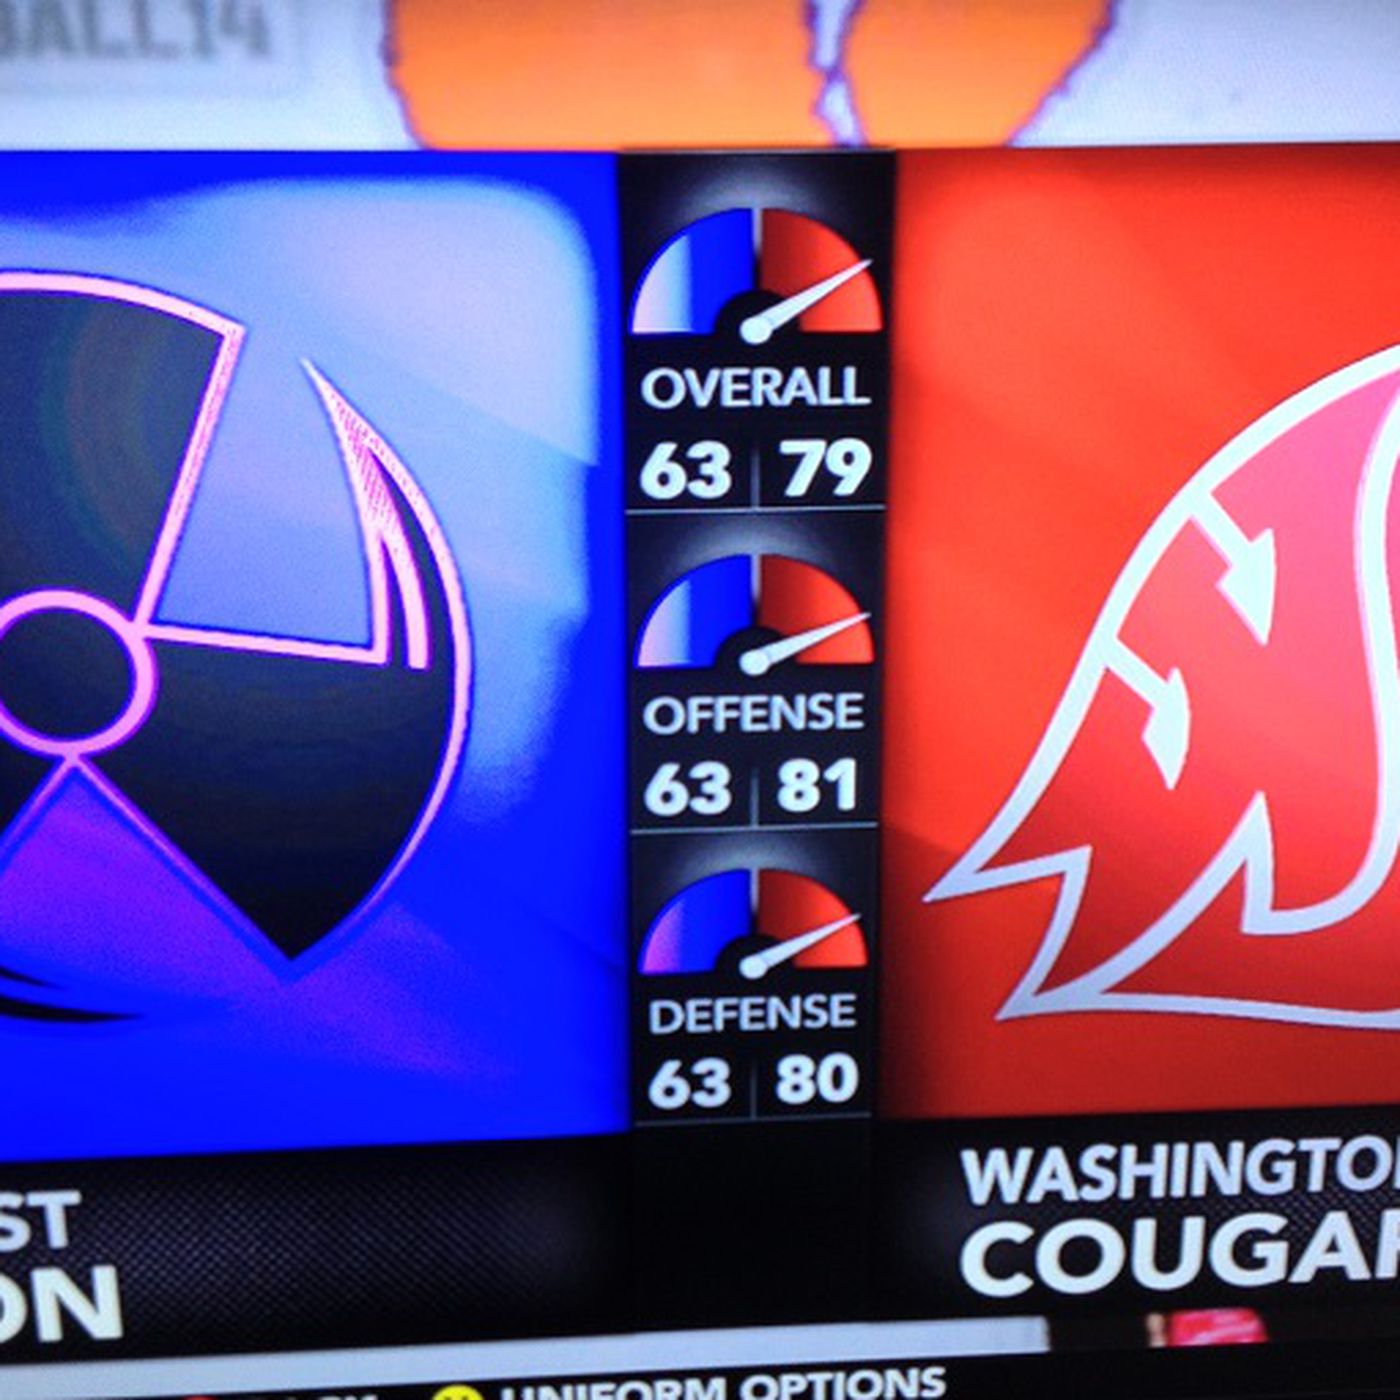 Simming the Season, Week 3: Cougs beat FCS West 35-0 - CougCenter